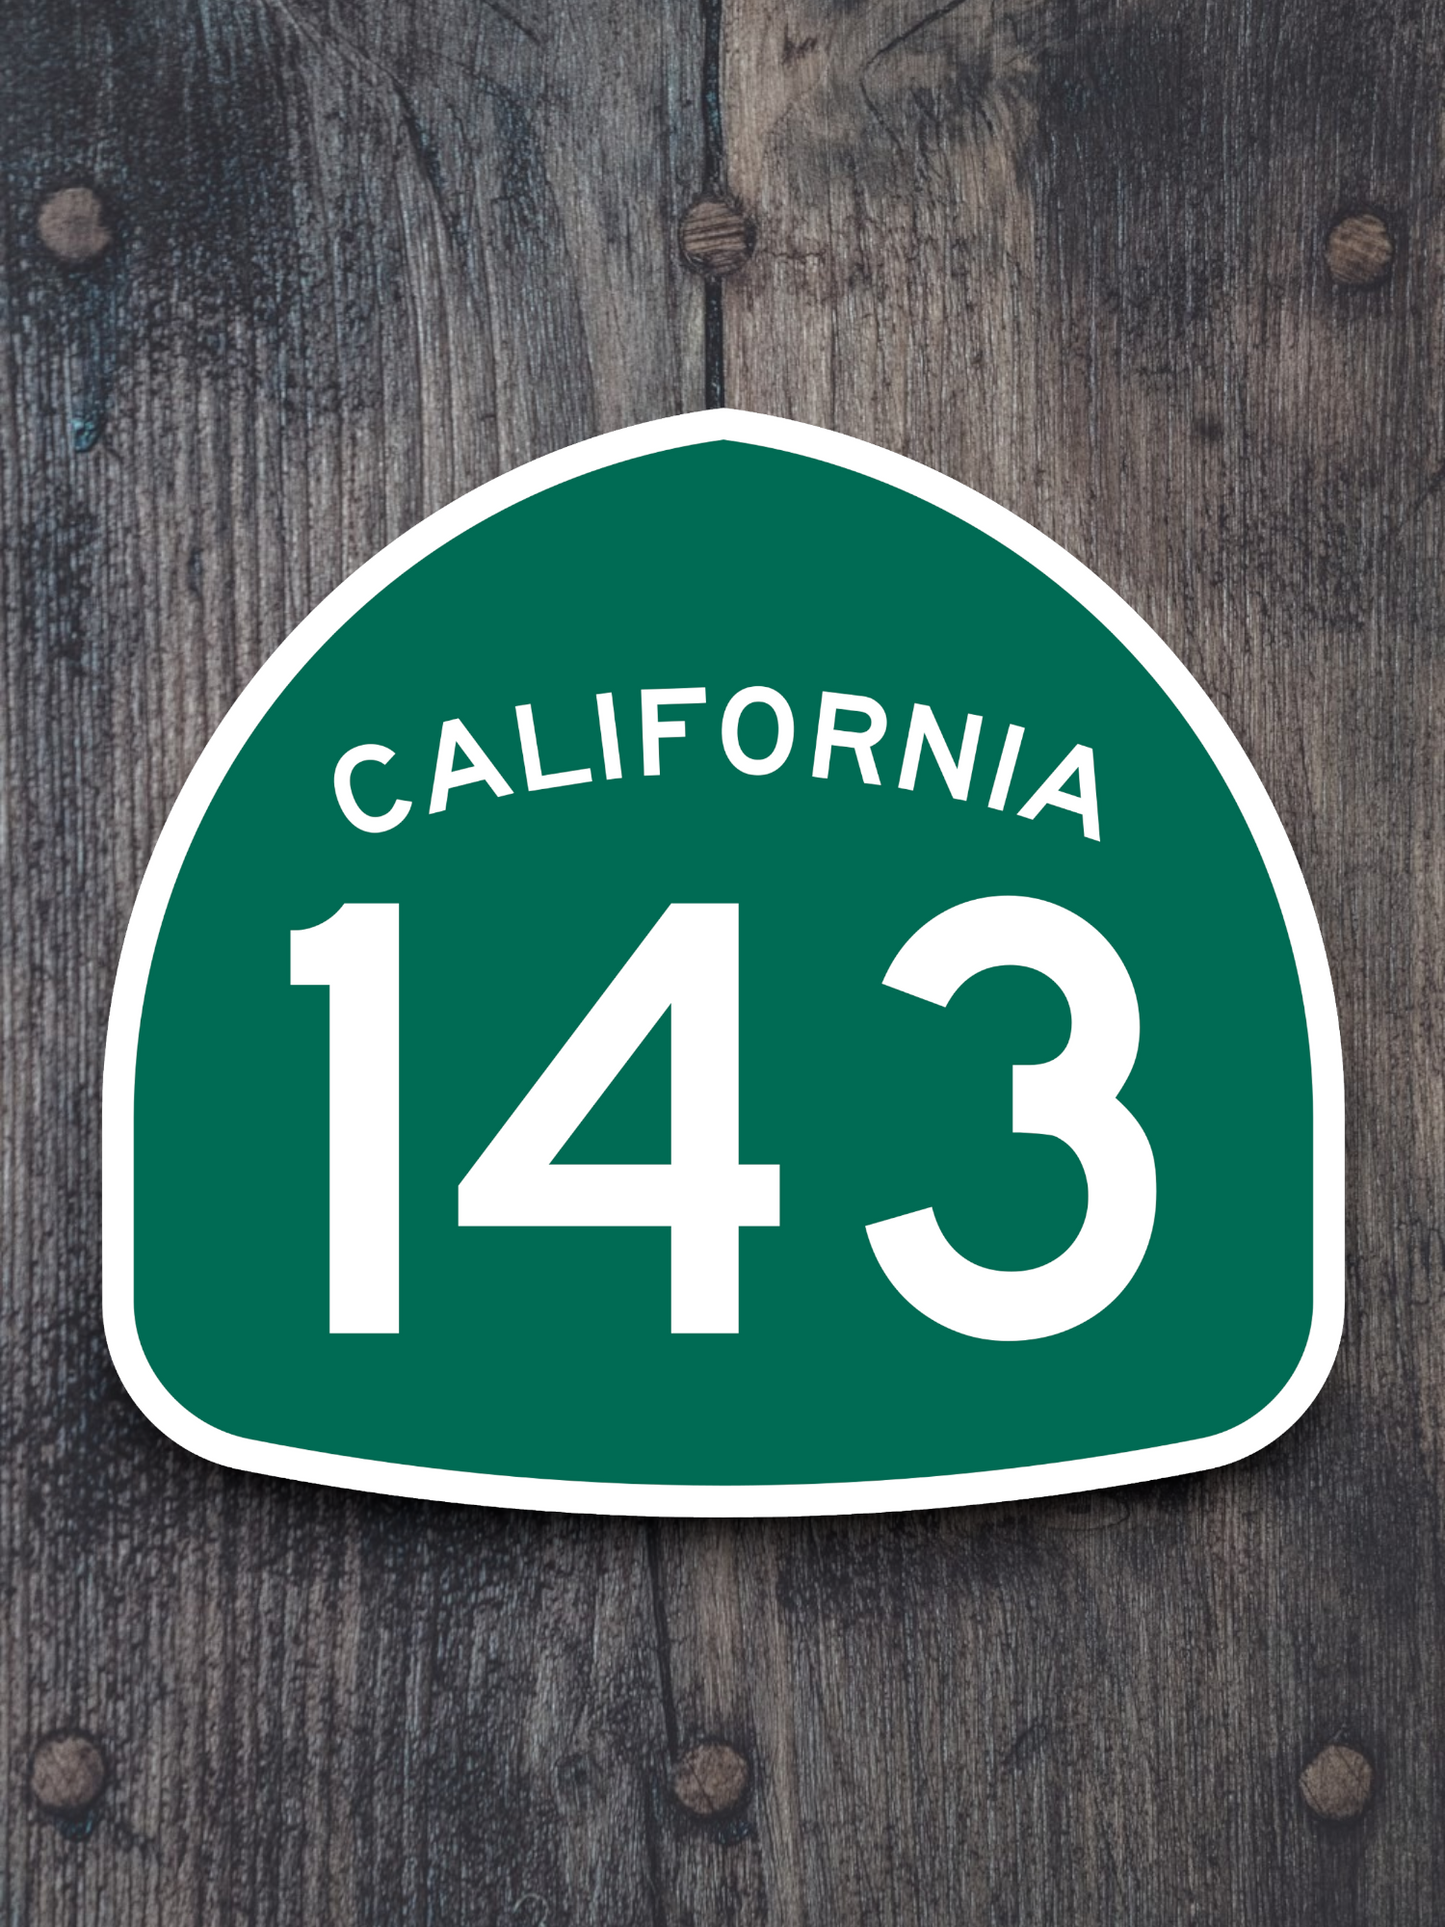 California State Route 143 Road Sign Sticker